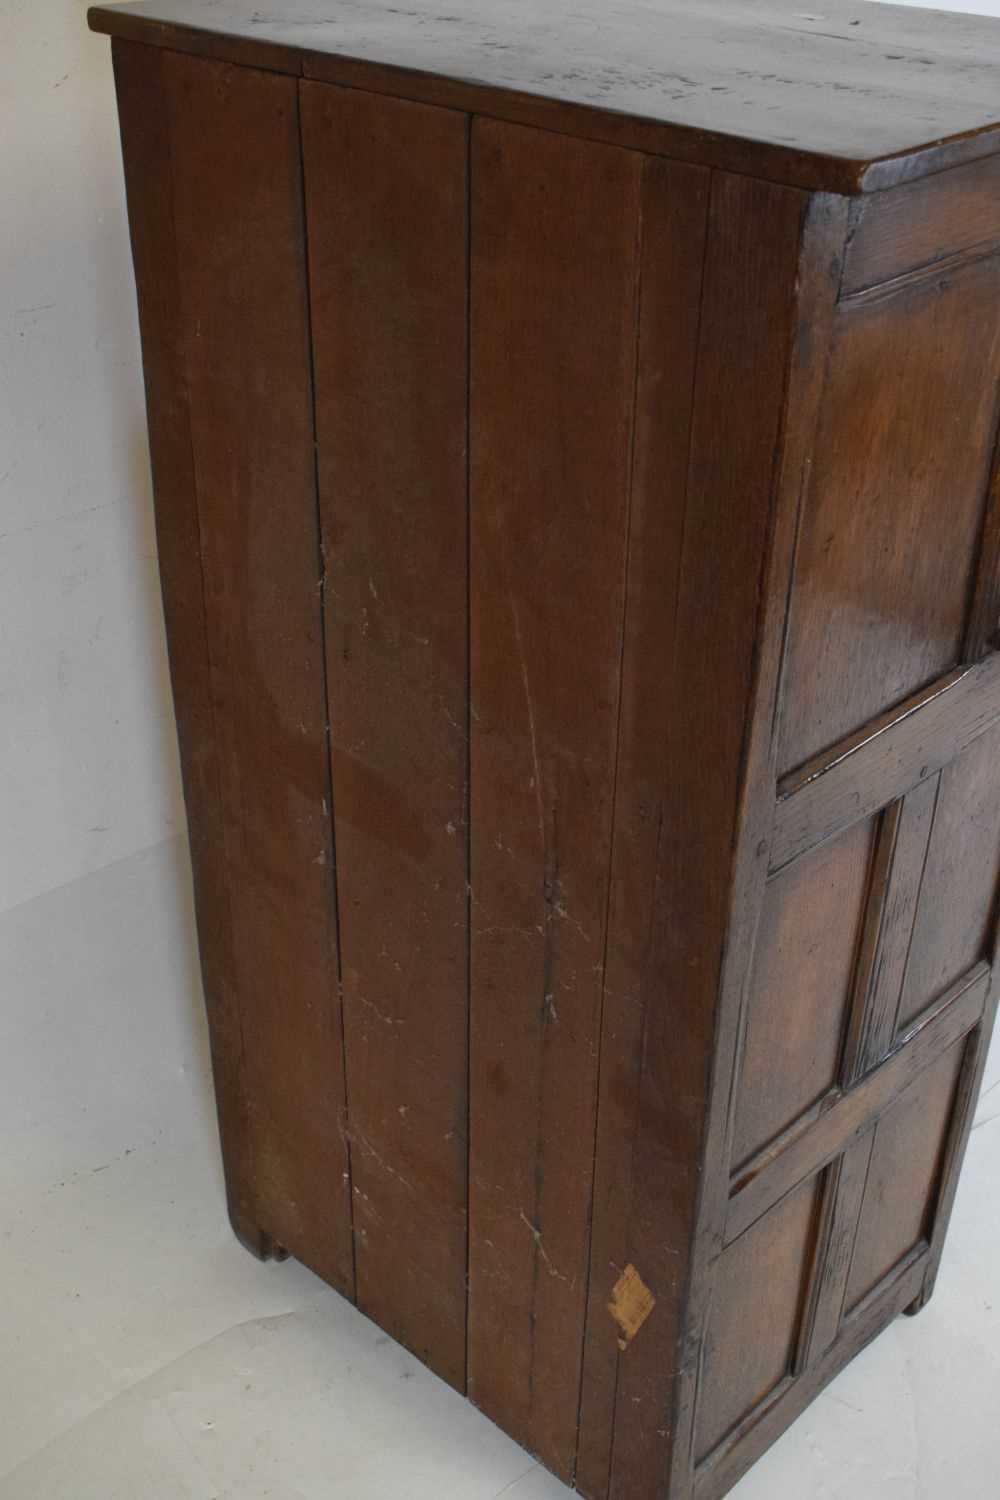 Small old reproduction press or court cupboard - Image 7 of 7